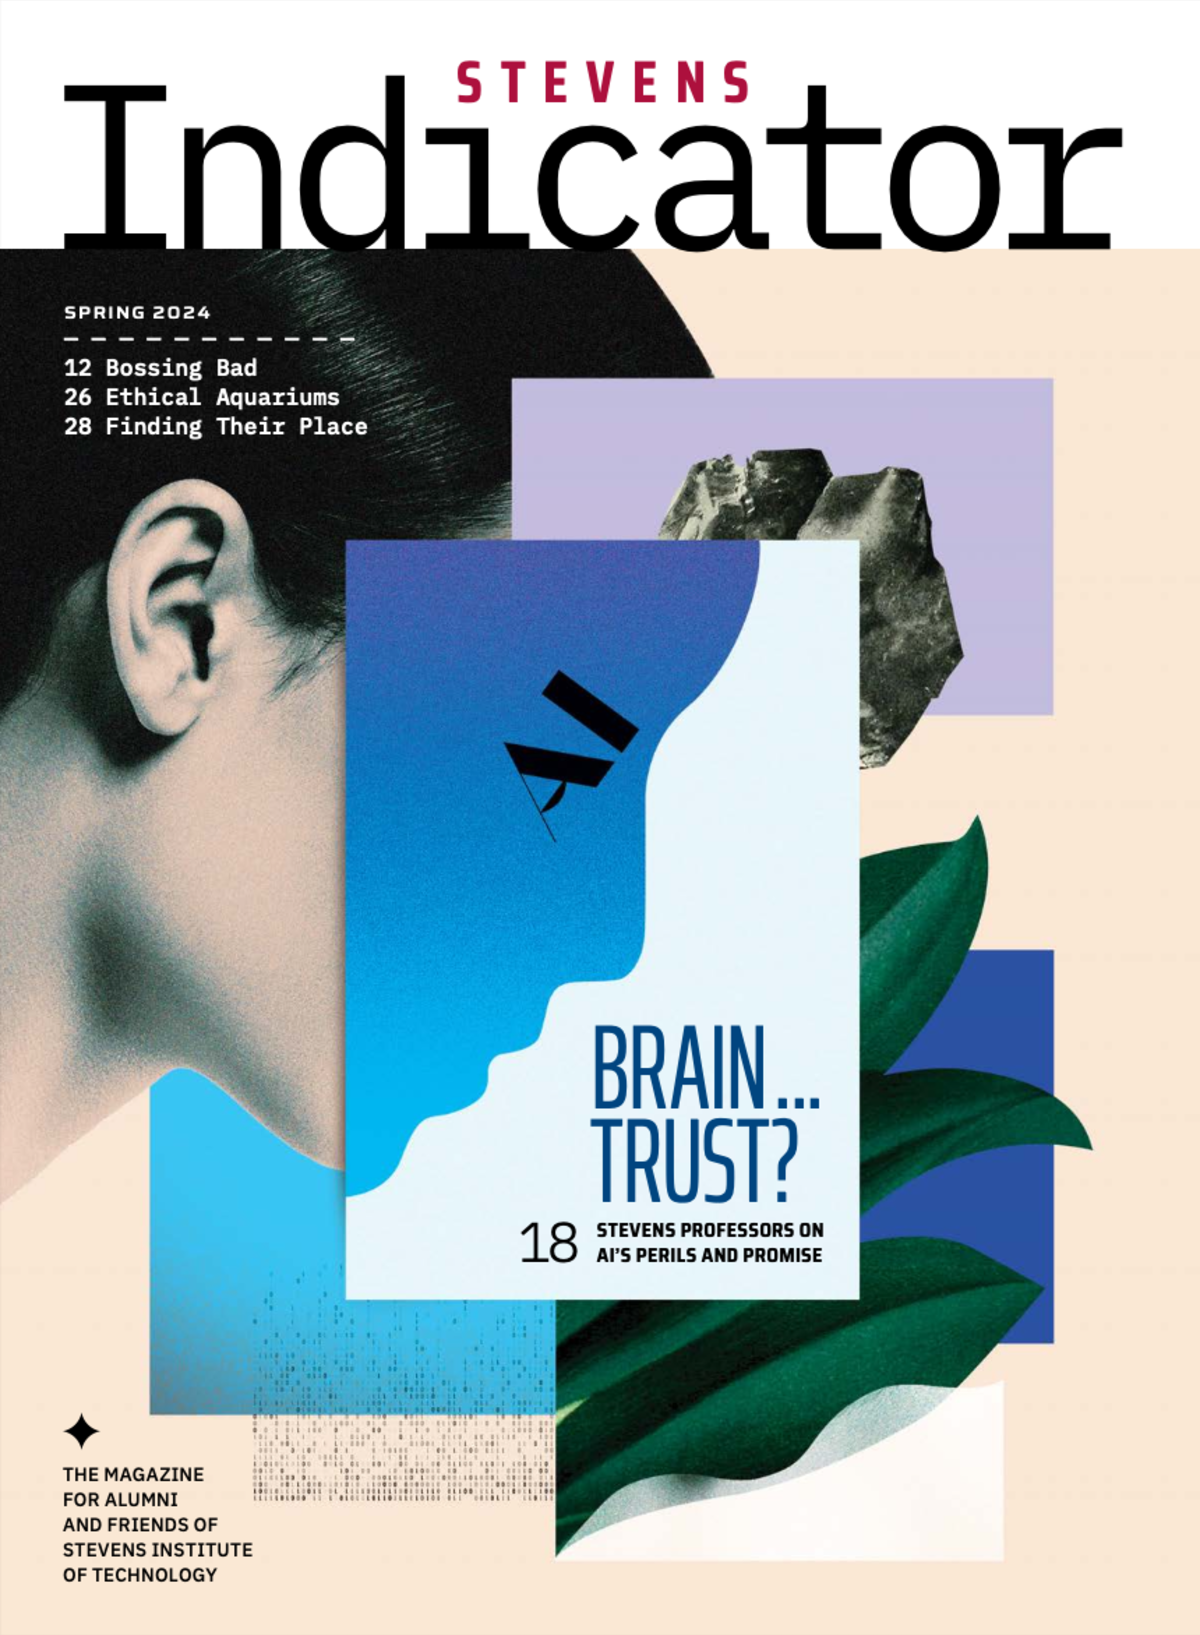 Cover of the Spring 2024 issue of the Indicator